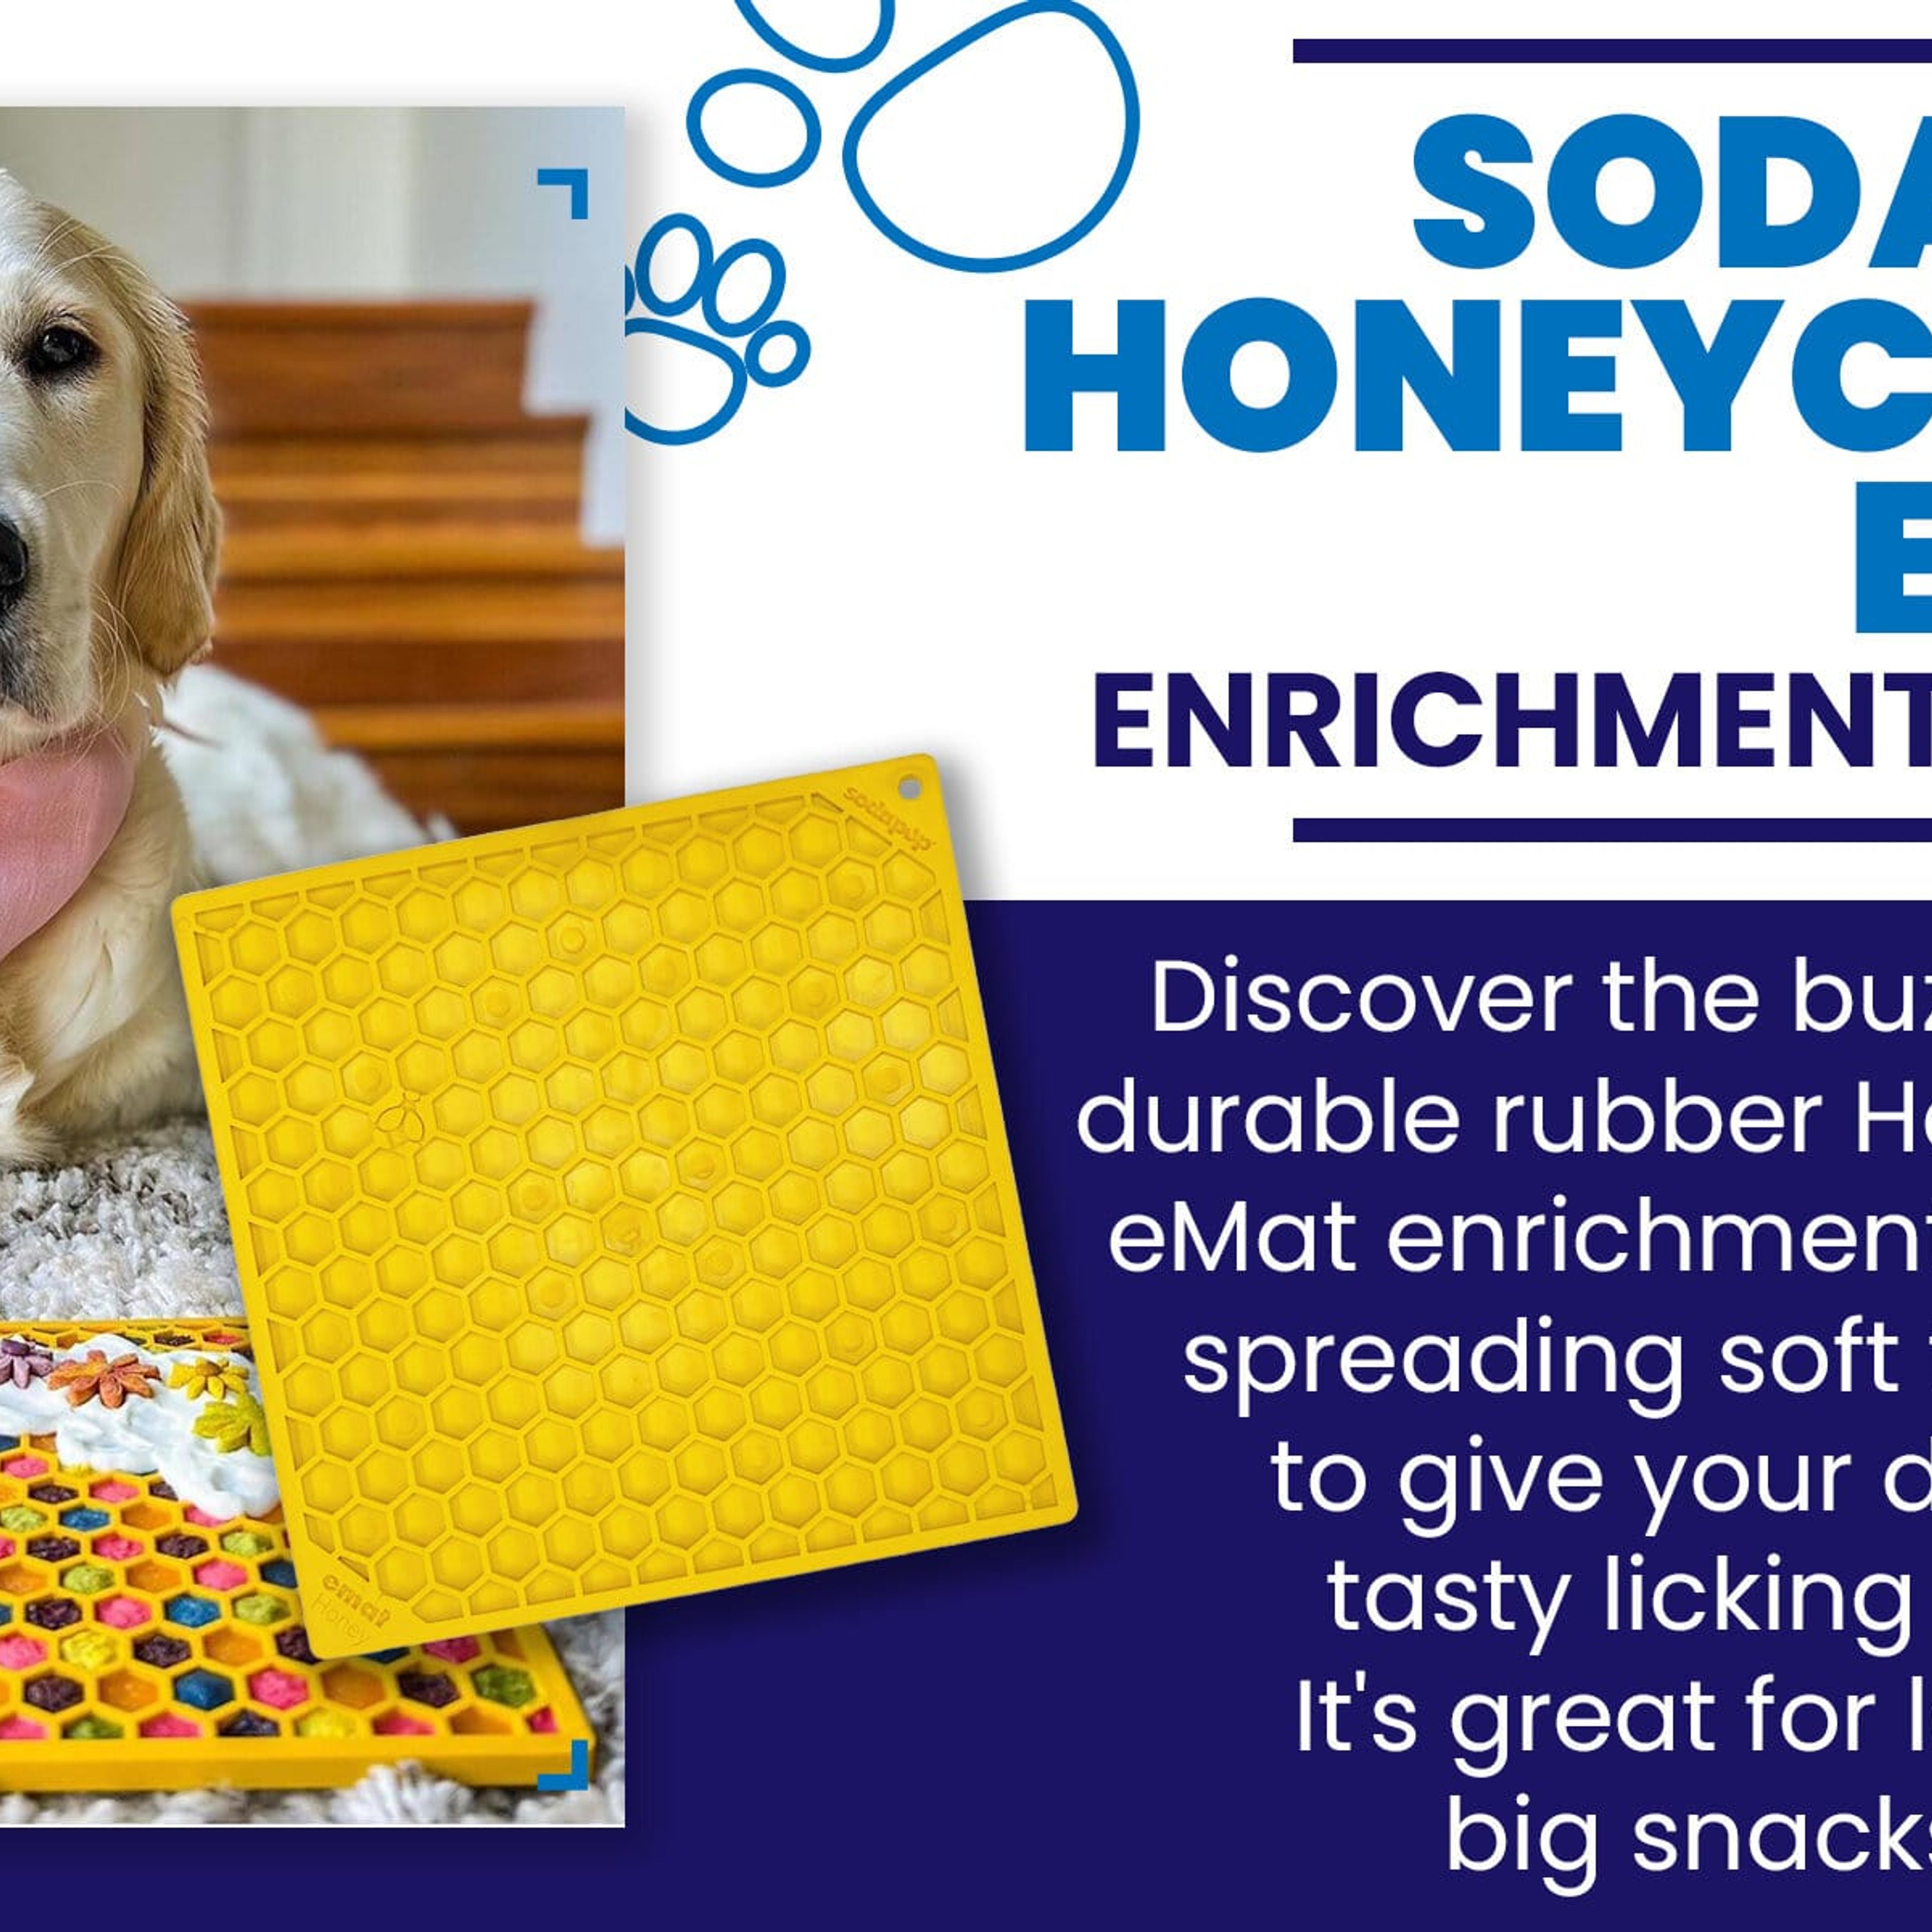 https://cdn.prod.marmalade.co/products/3840x3840/filters:quality(80)/www.sodapup.com%2Fproducts%2Fhoneycomb-design-emat-enrichment-lick-mat%2F1660593855%2FEBC2-StandardImageHeaderwithText-SodaPup-EnrichmentFeeder-SodaPup-eMatHoneycomb-Yellow-Large.jpg